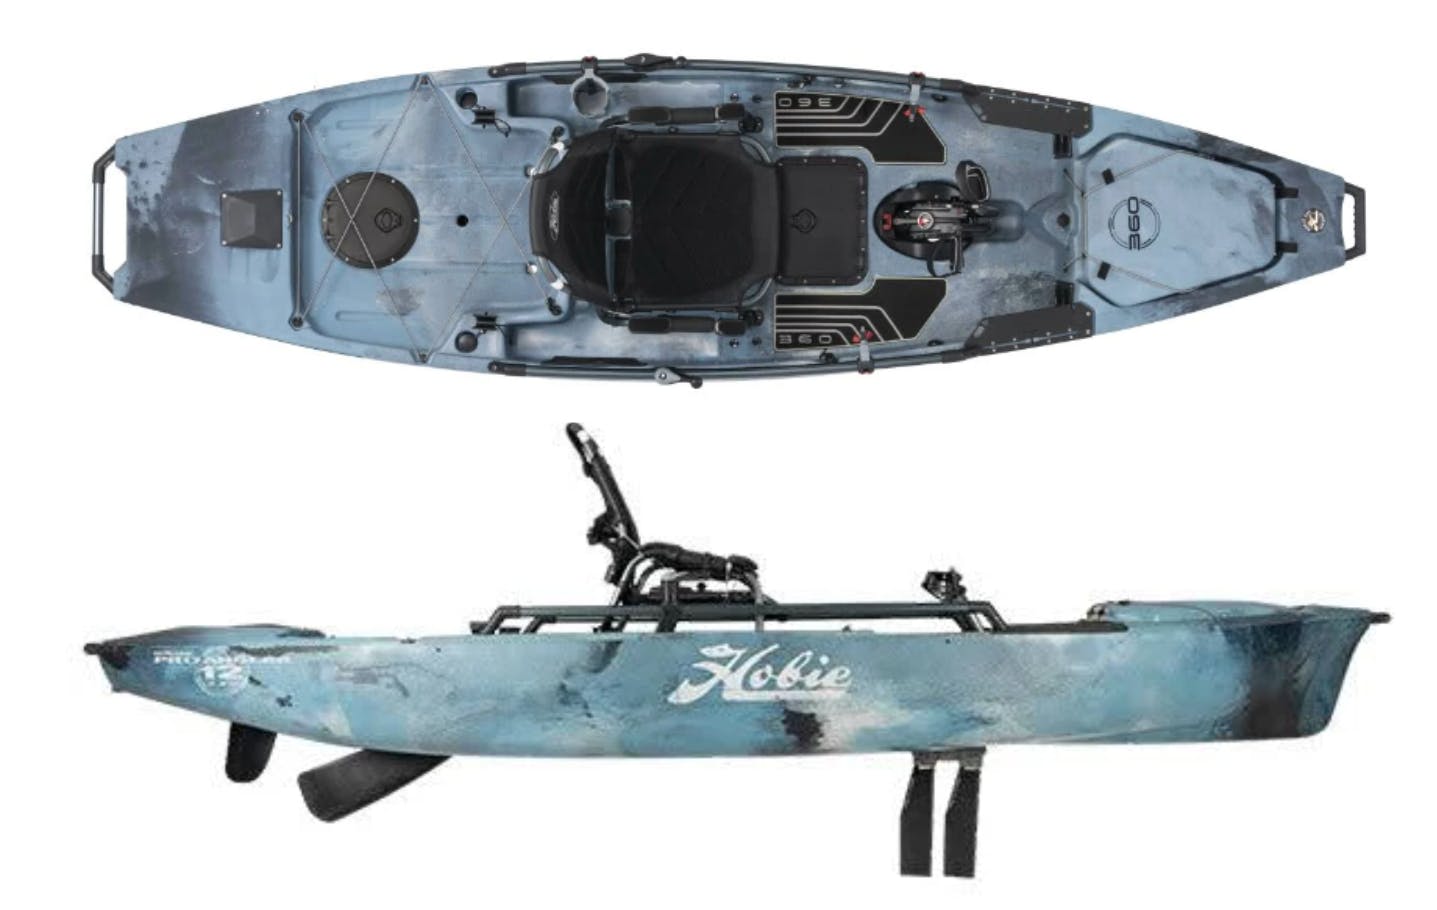 A top down view and side view of the Hobie Pro Angler Kayak.